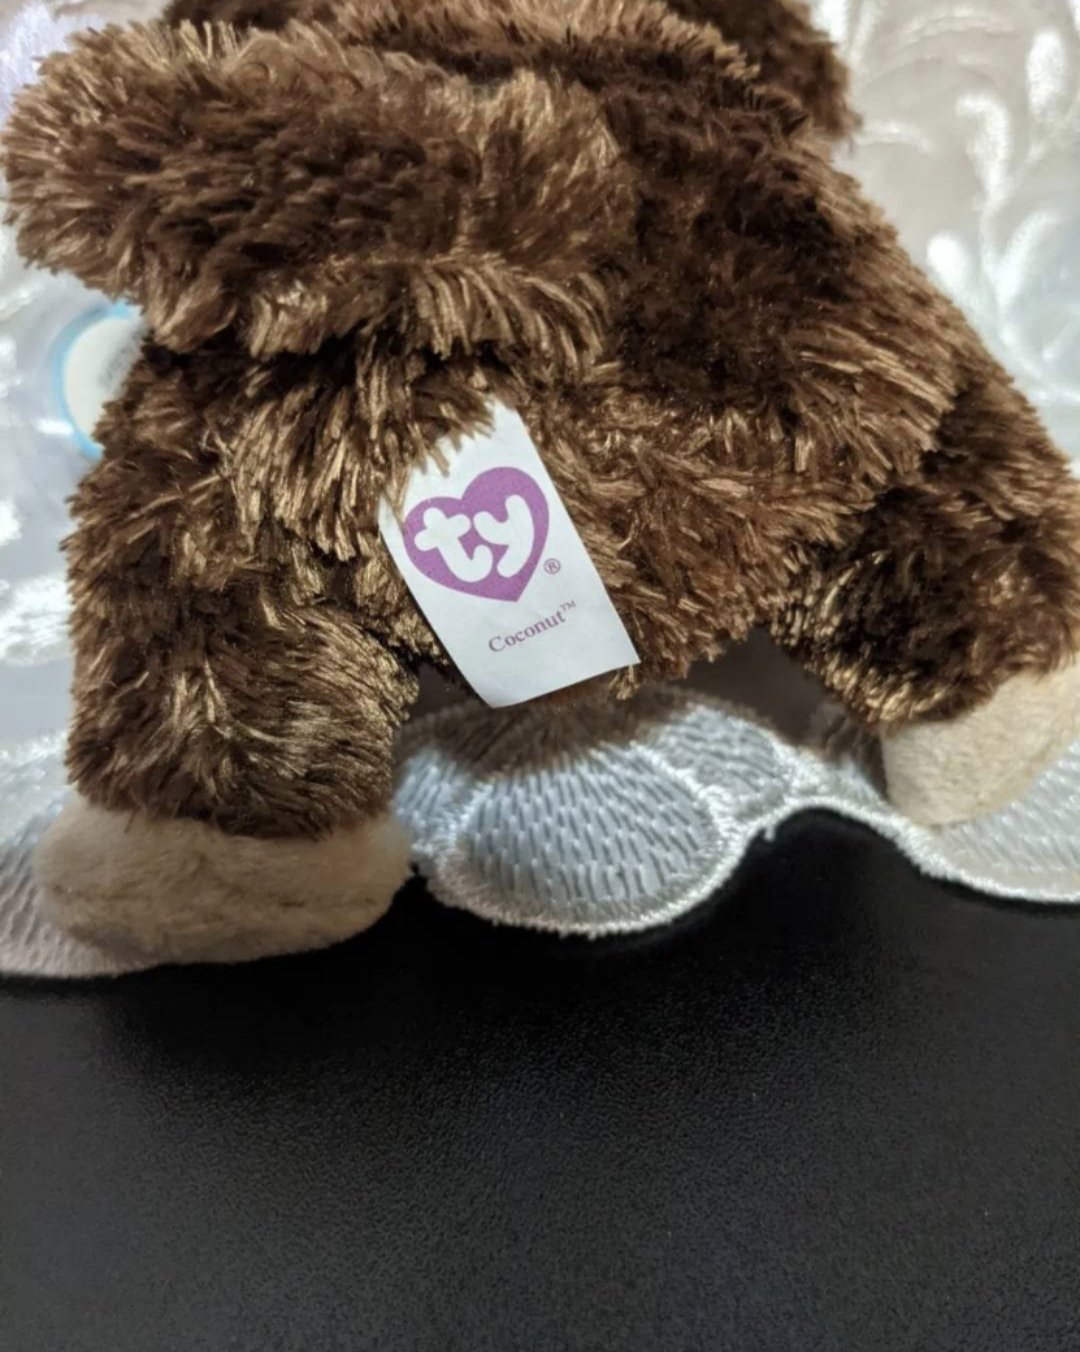 TY Beanie Boos - Coconut The Monkey 1st Gen Purple Tag (6in) - Vintage Beanies Canada